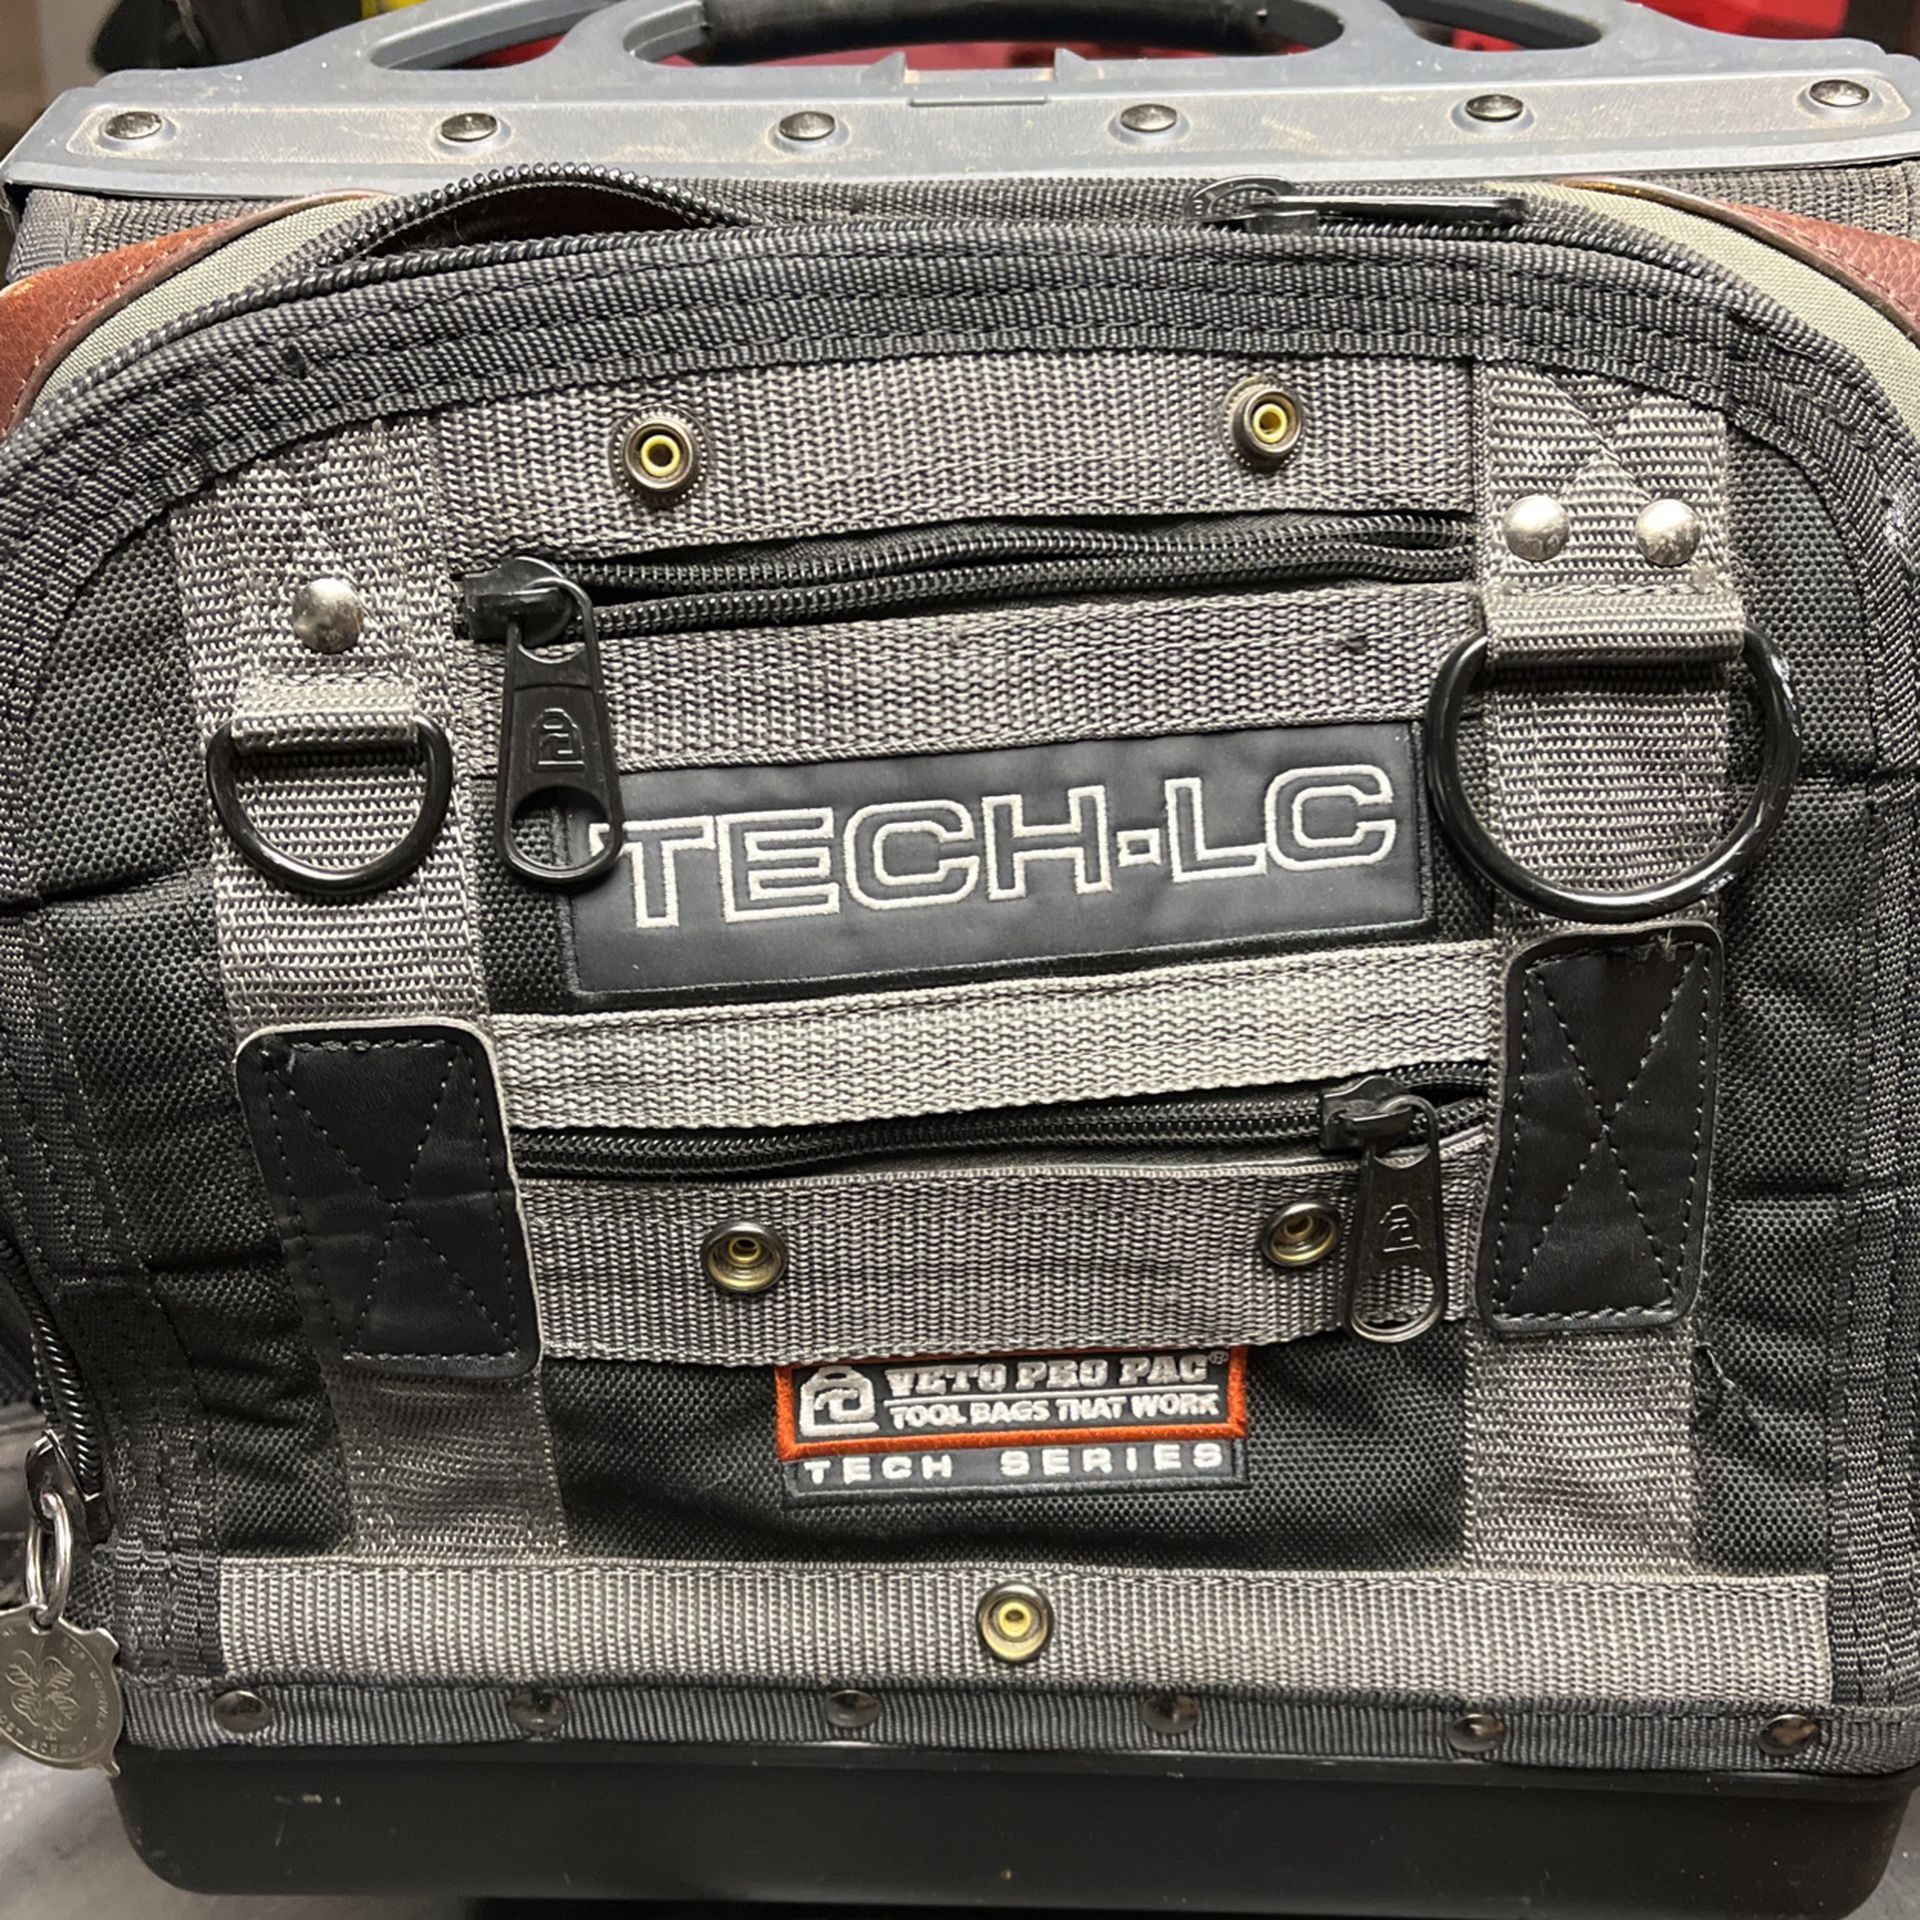 Veto Pro PAC Tech LC for Sale in Taylor, PA - OfferUp